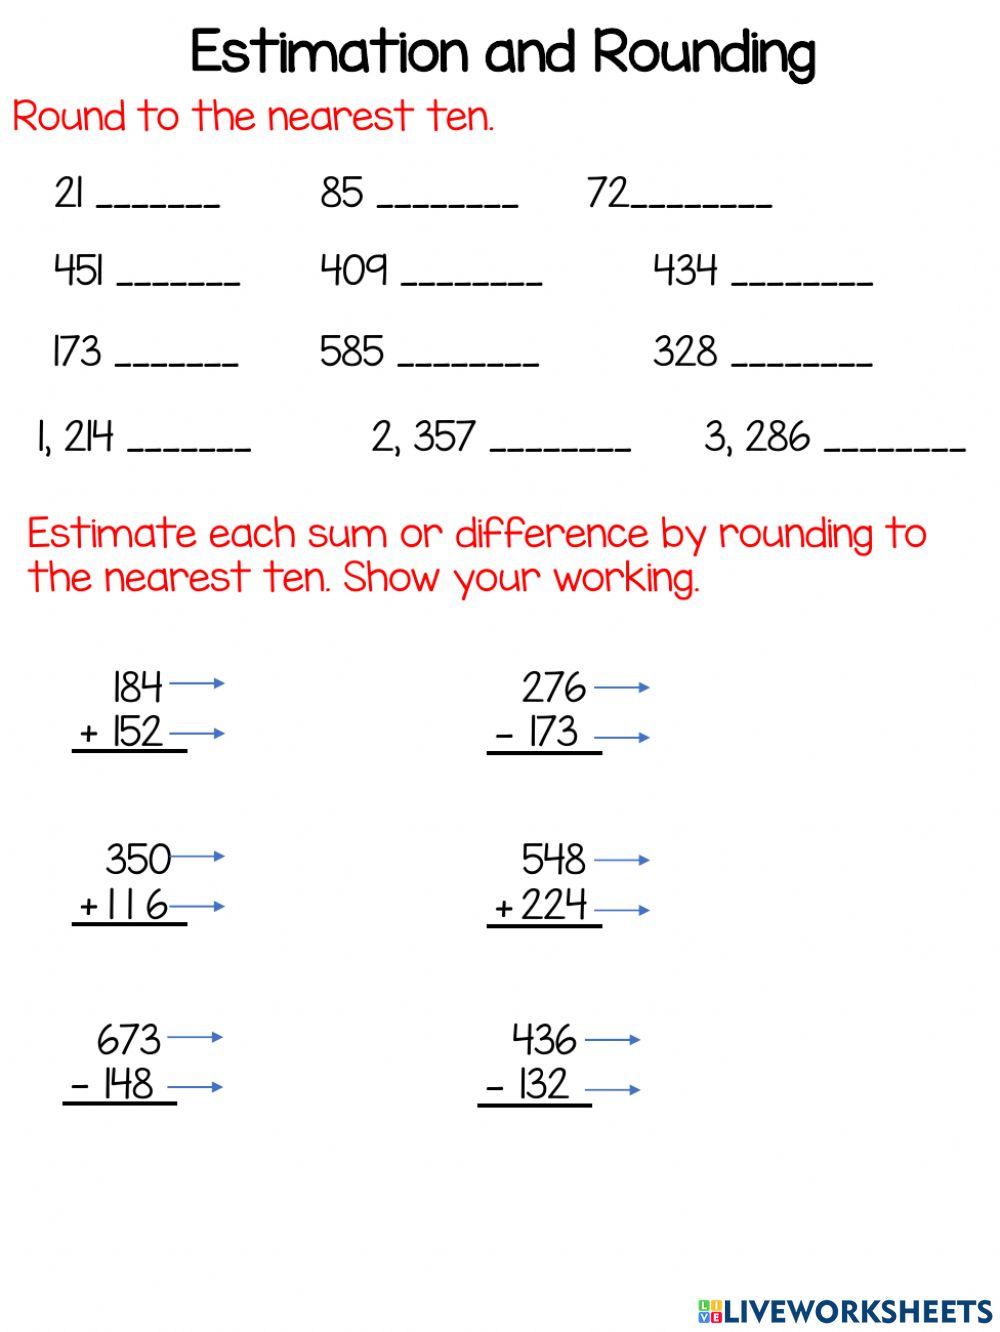 Rounding and estimation